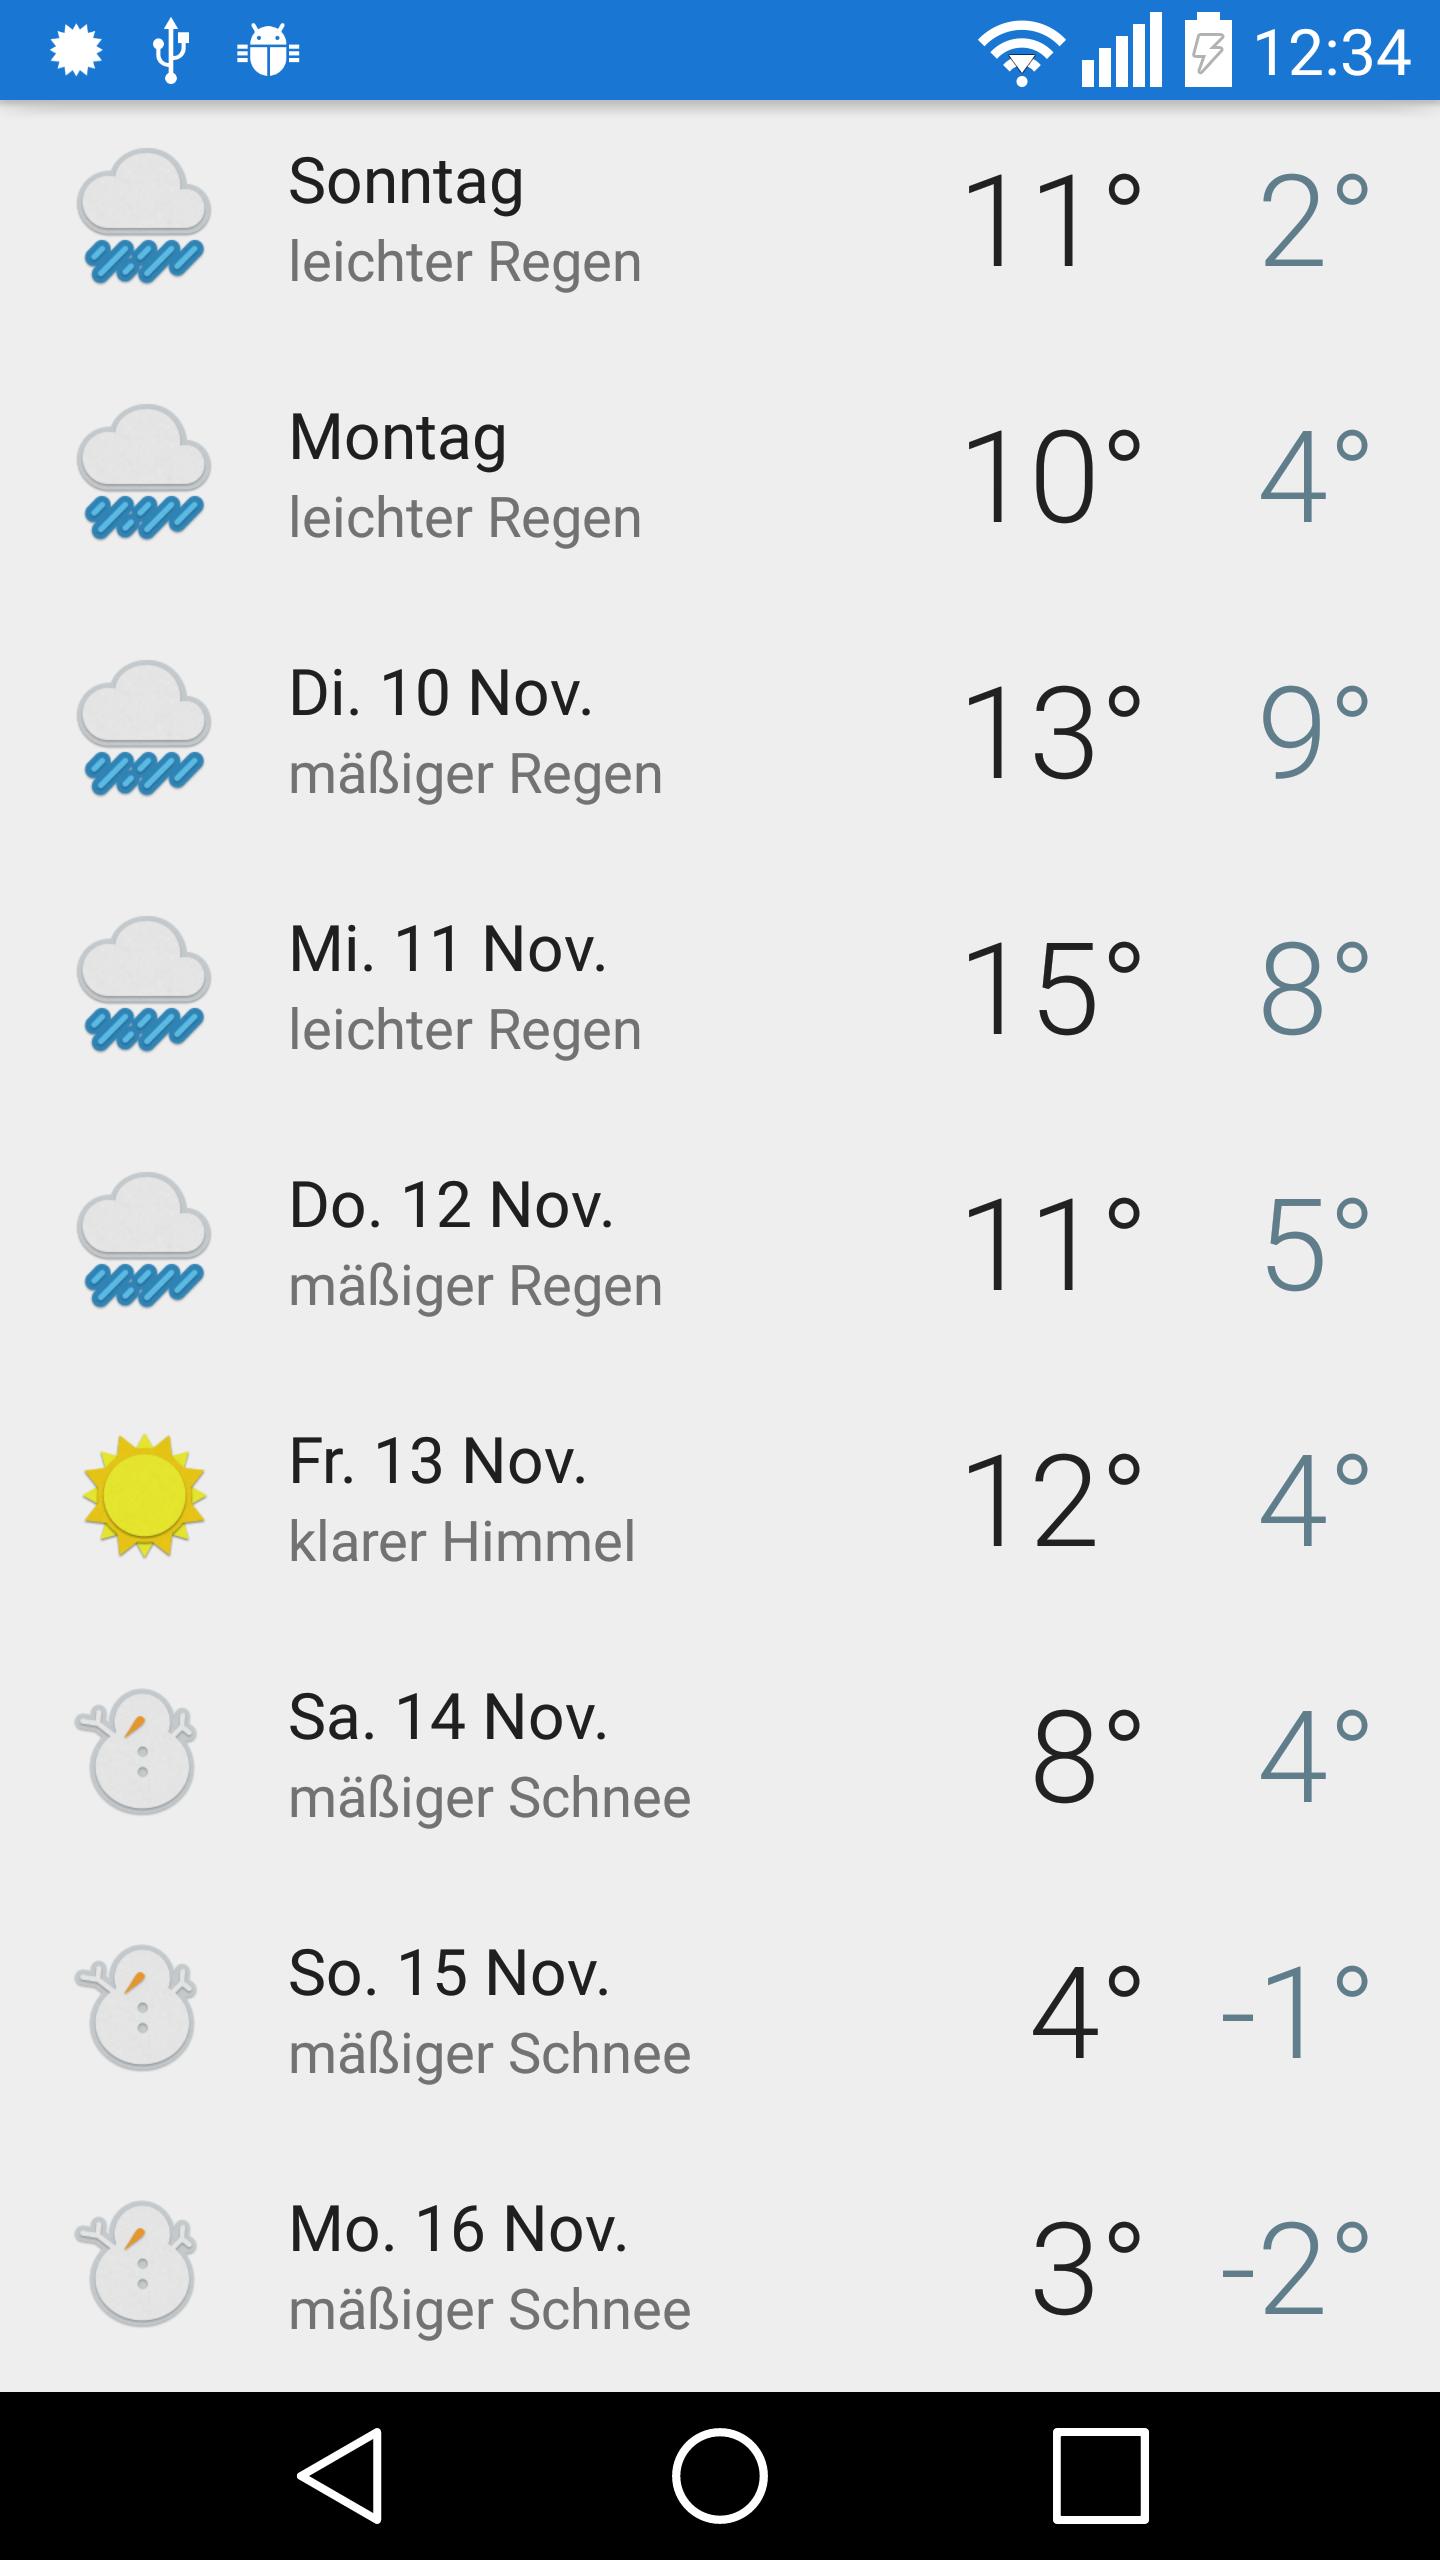 Hamm - Das Wetter for Android - APK Download